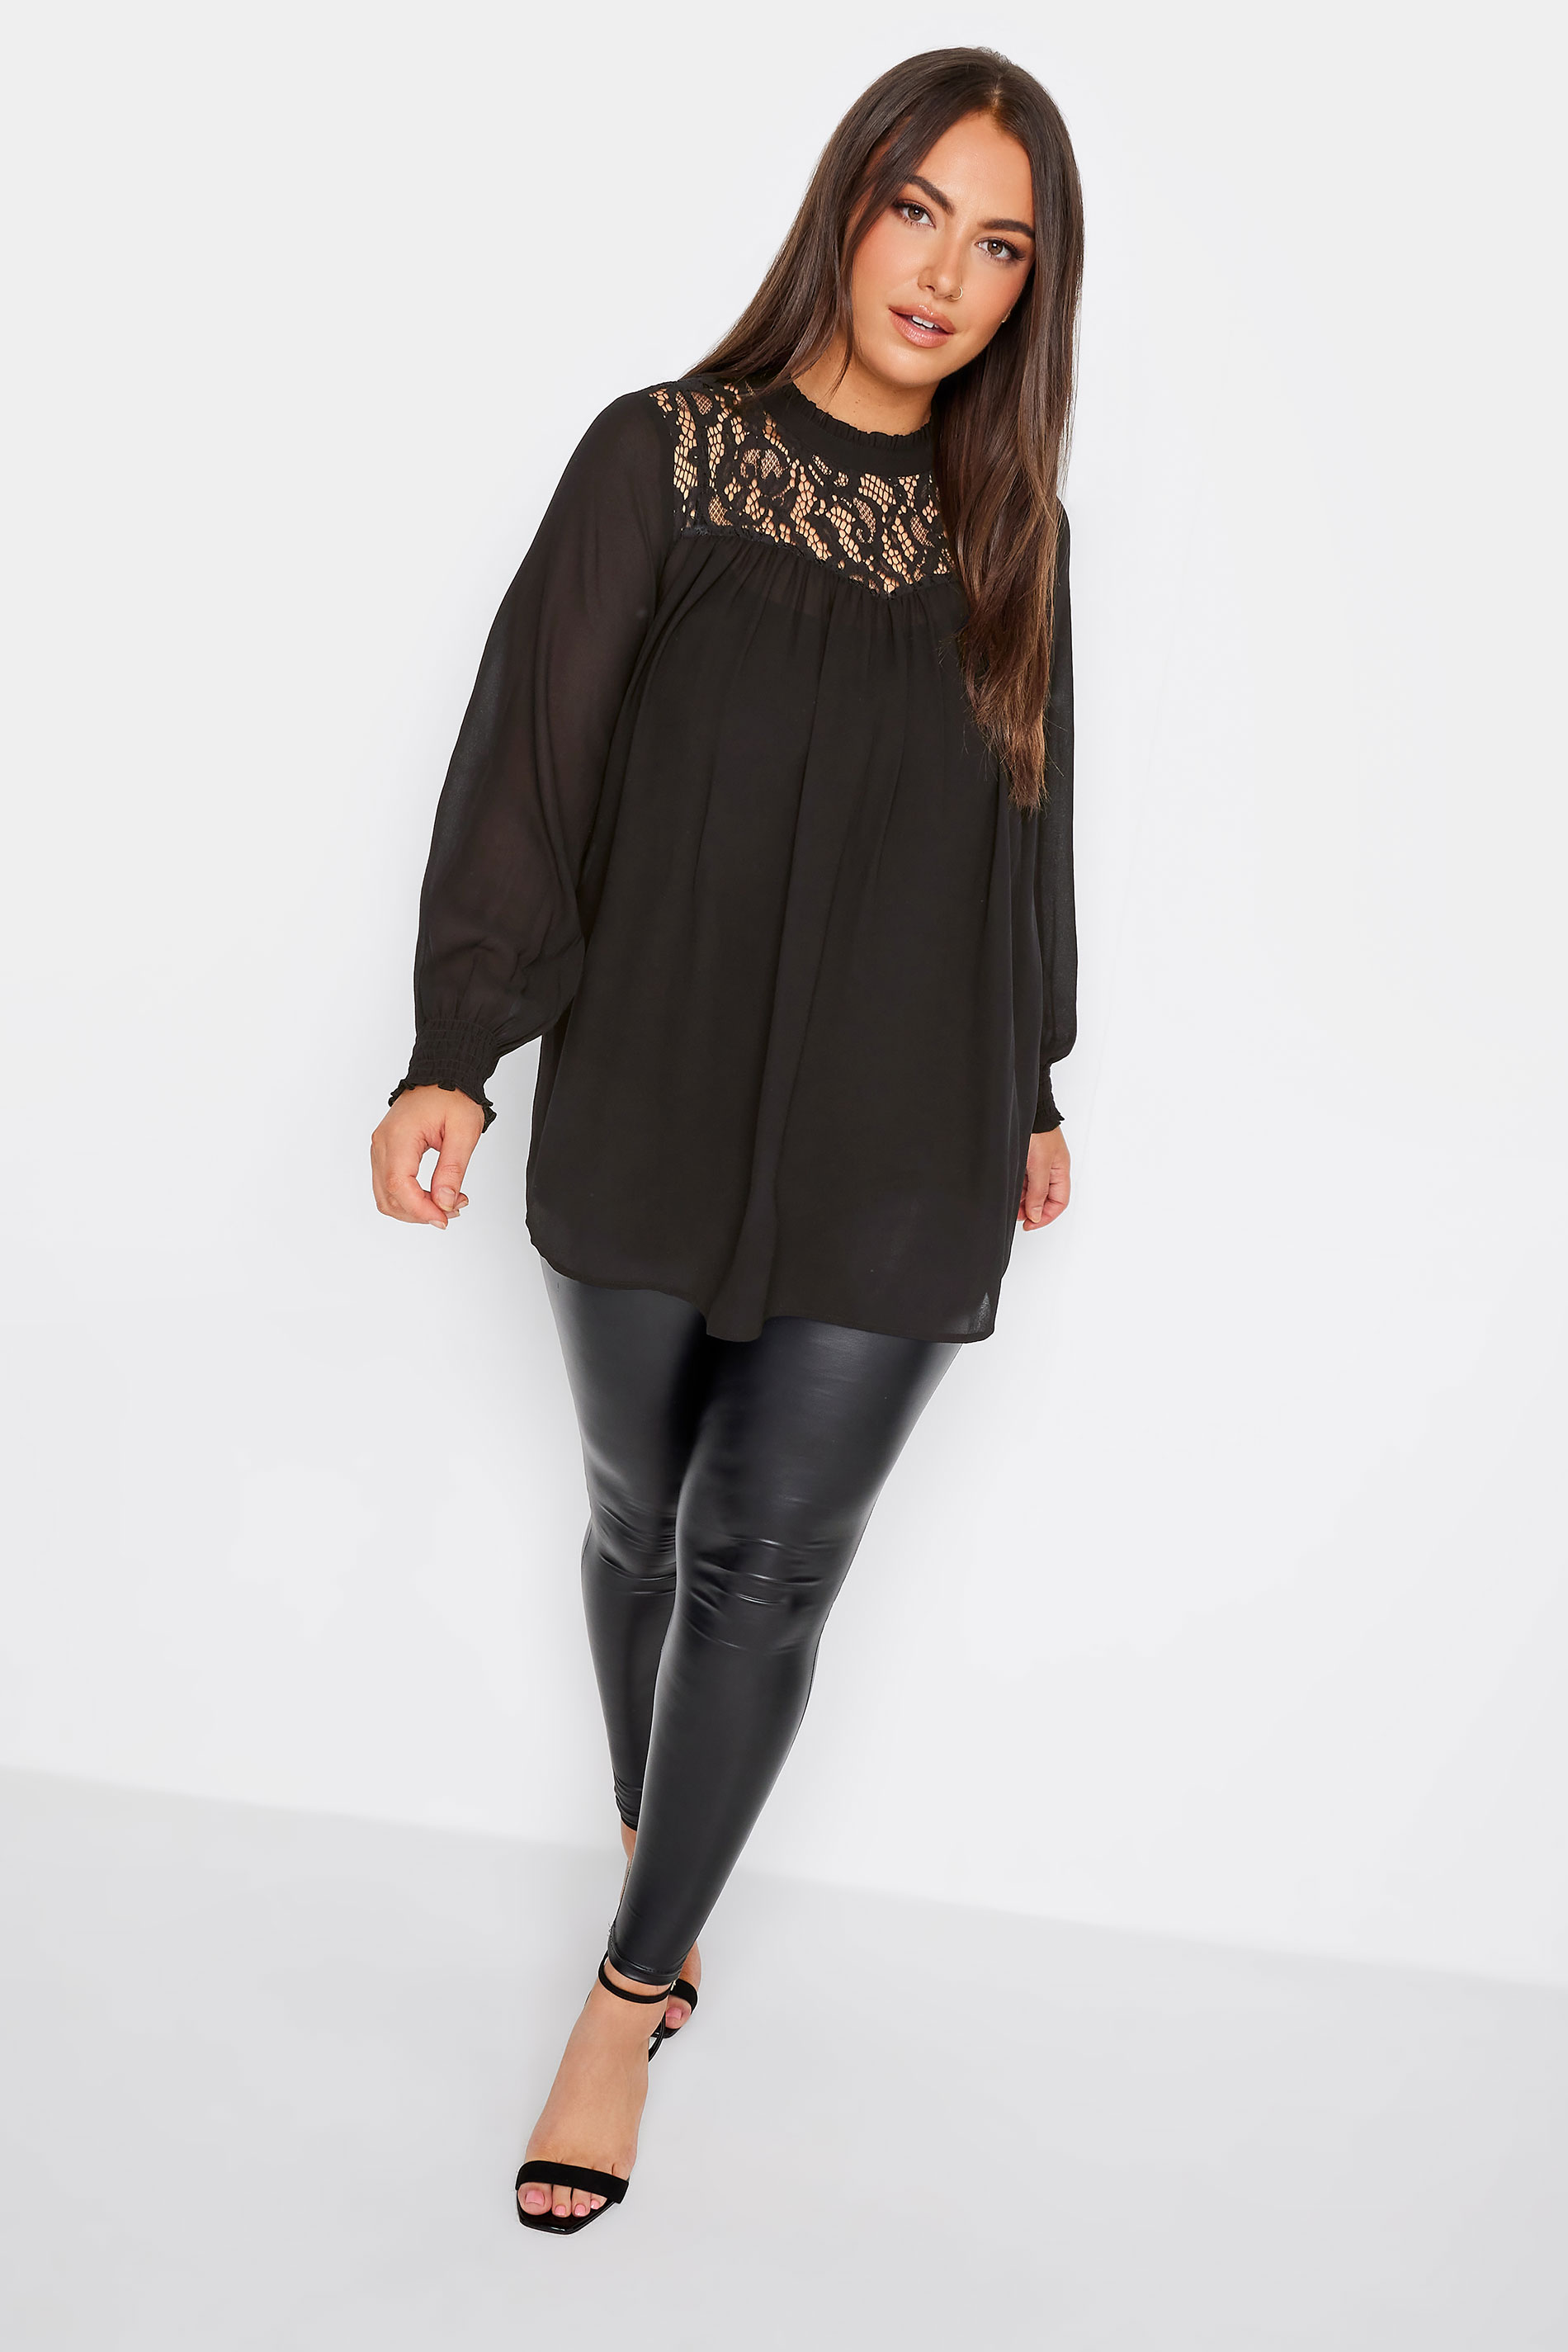 YOURS LONDON Plus Size Black Lace Ruffle Collar Blouse | Yours Clothing 2